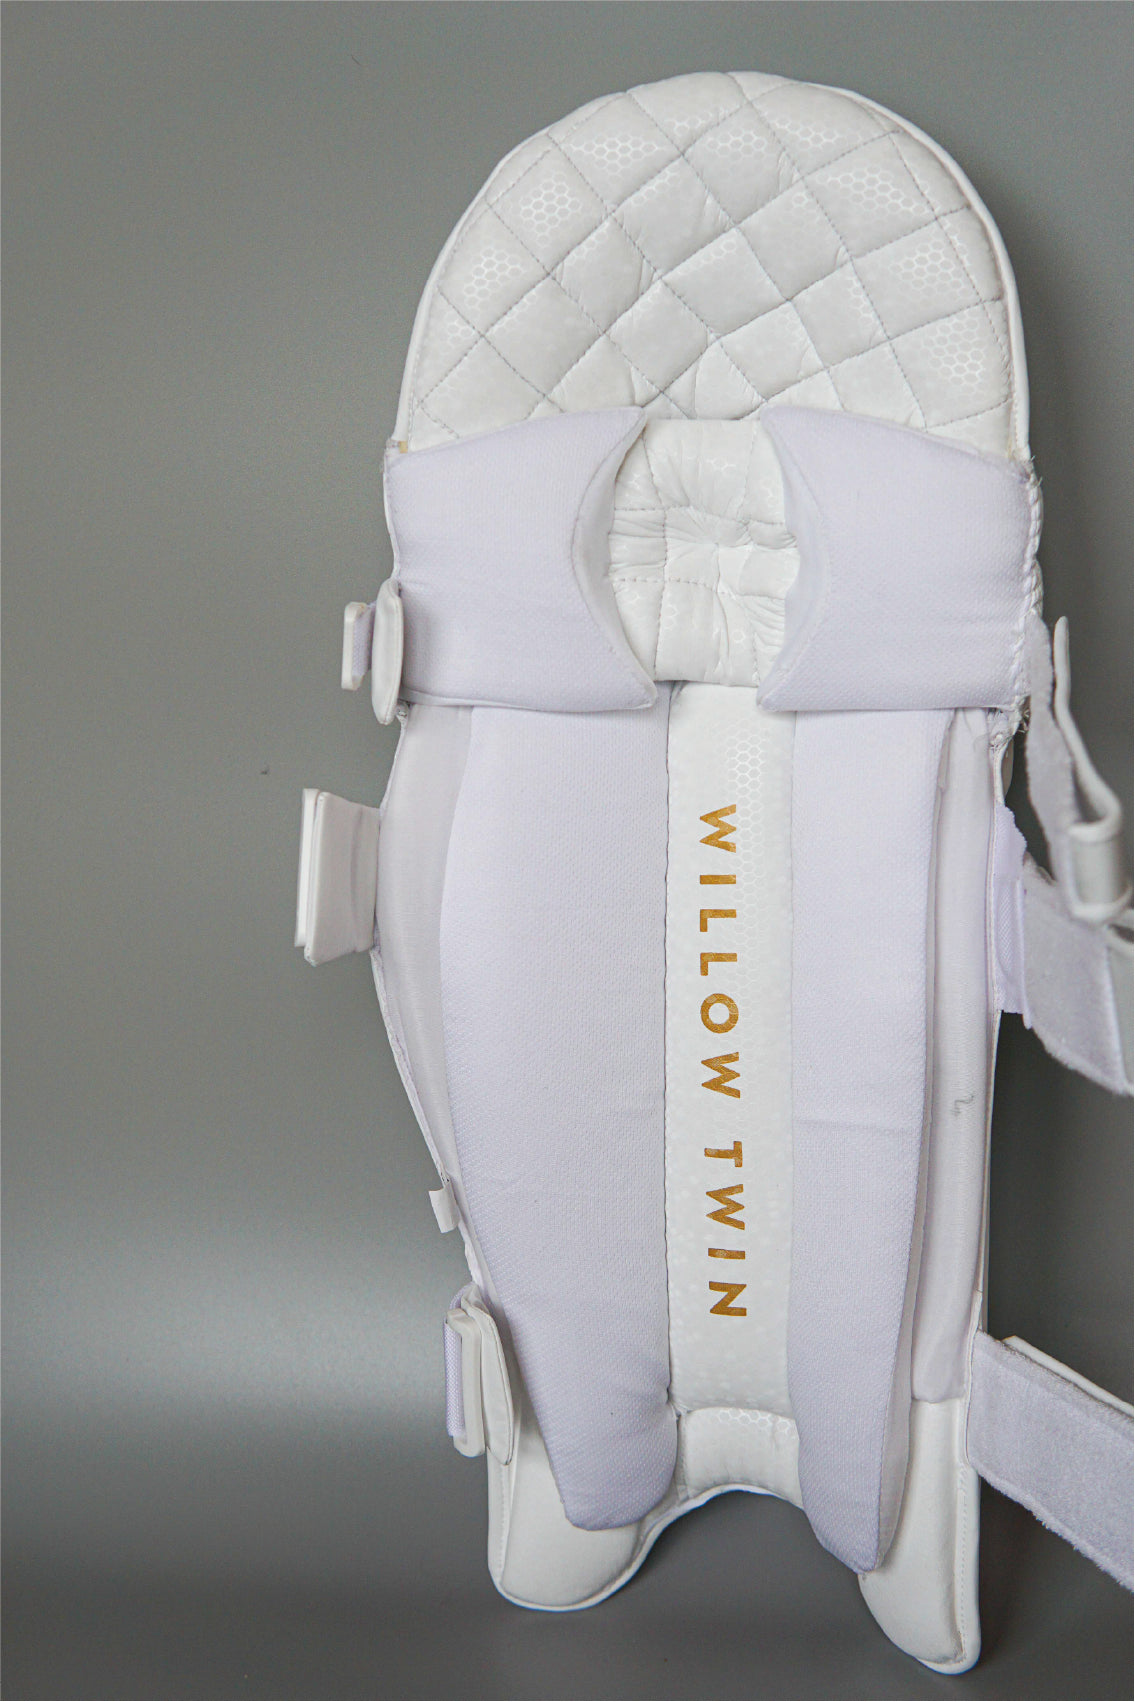 Willow Twin Cricket Batting Pads feature real leather for comfort and performance